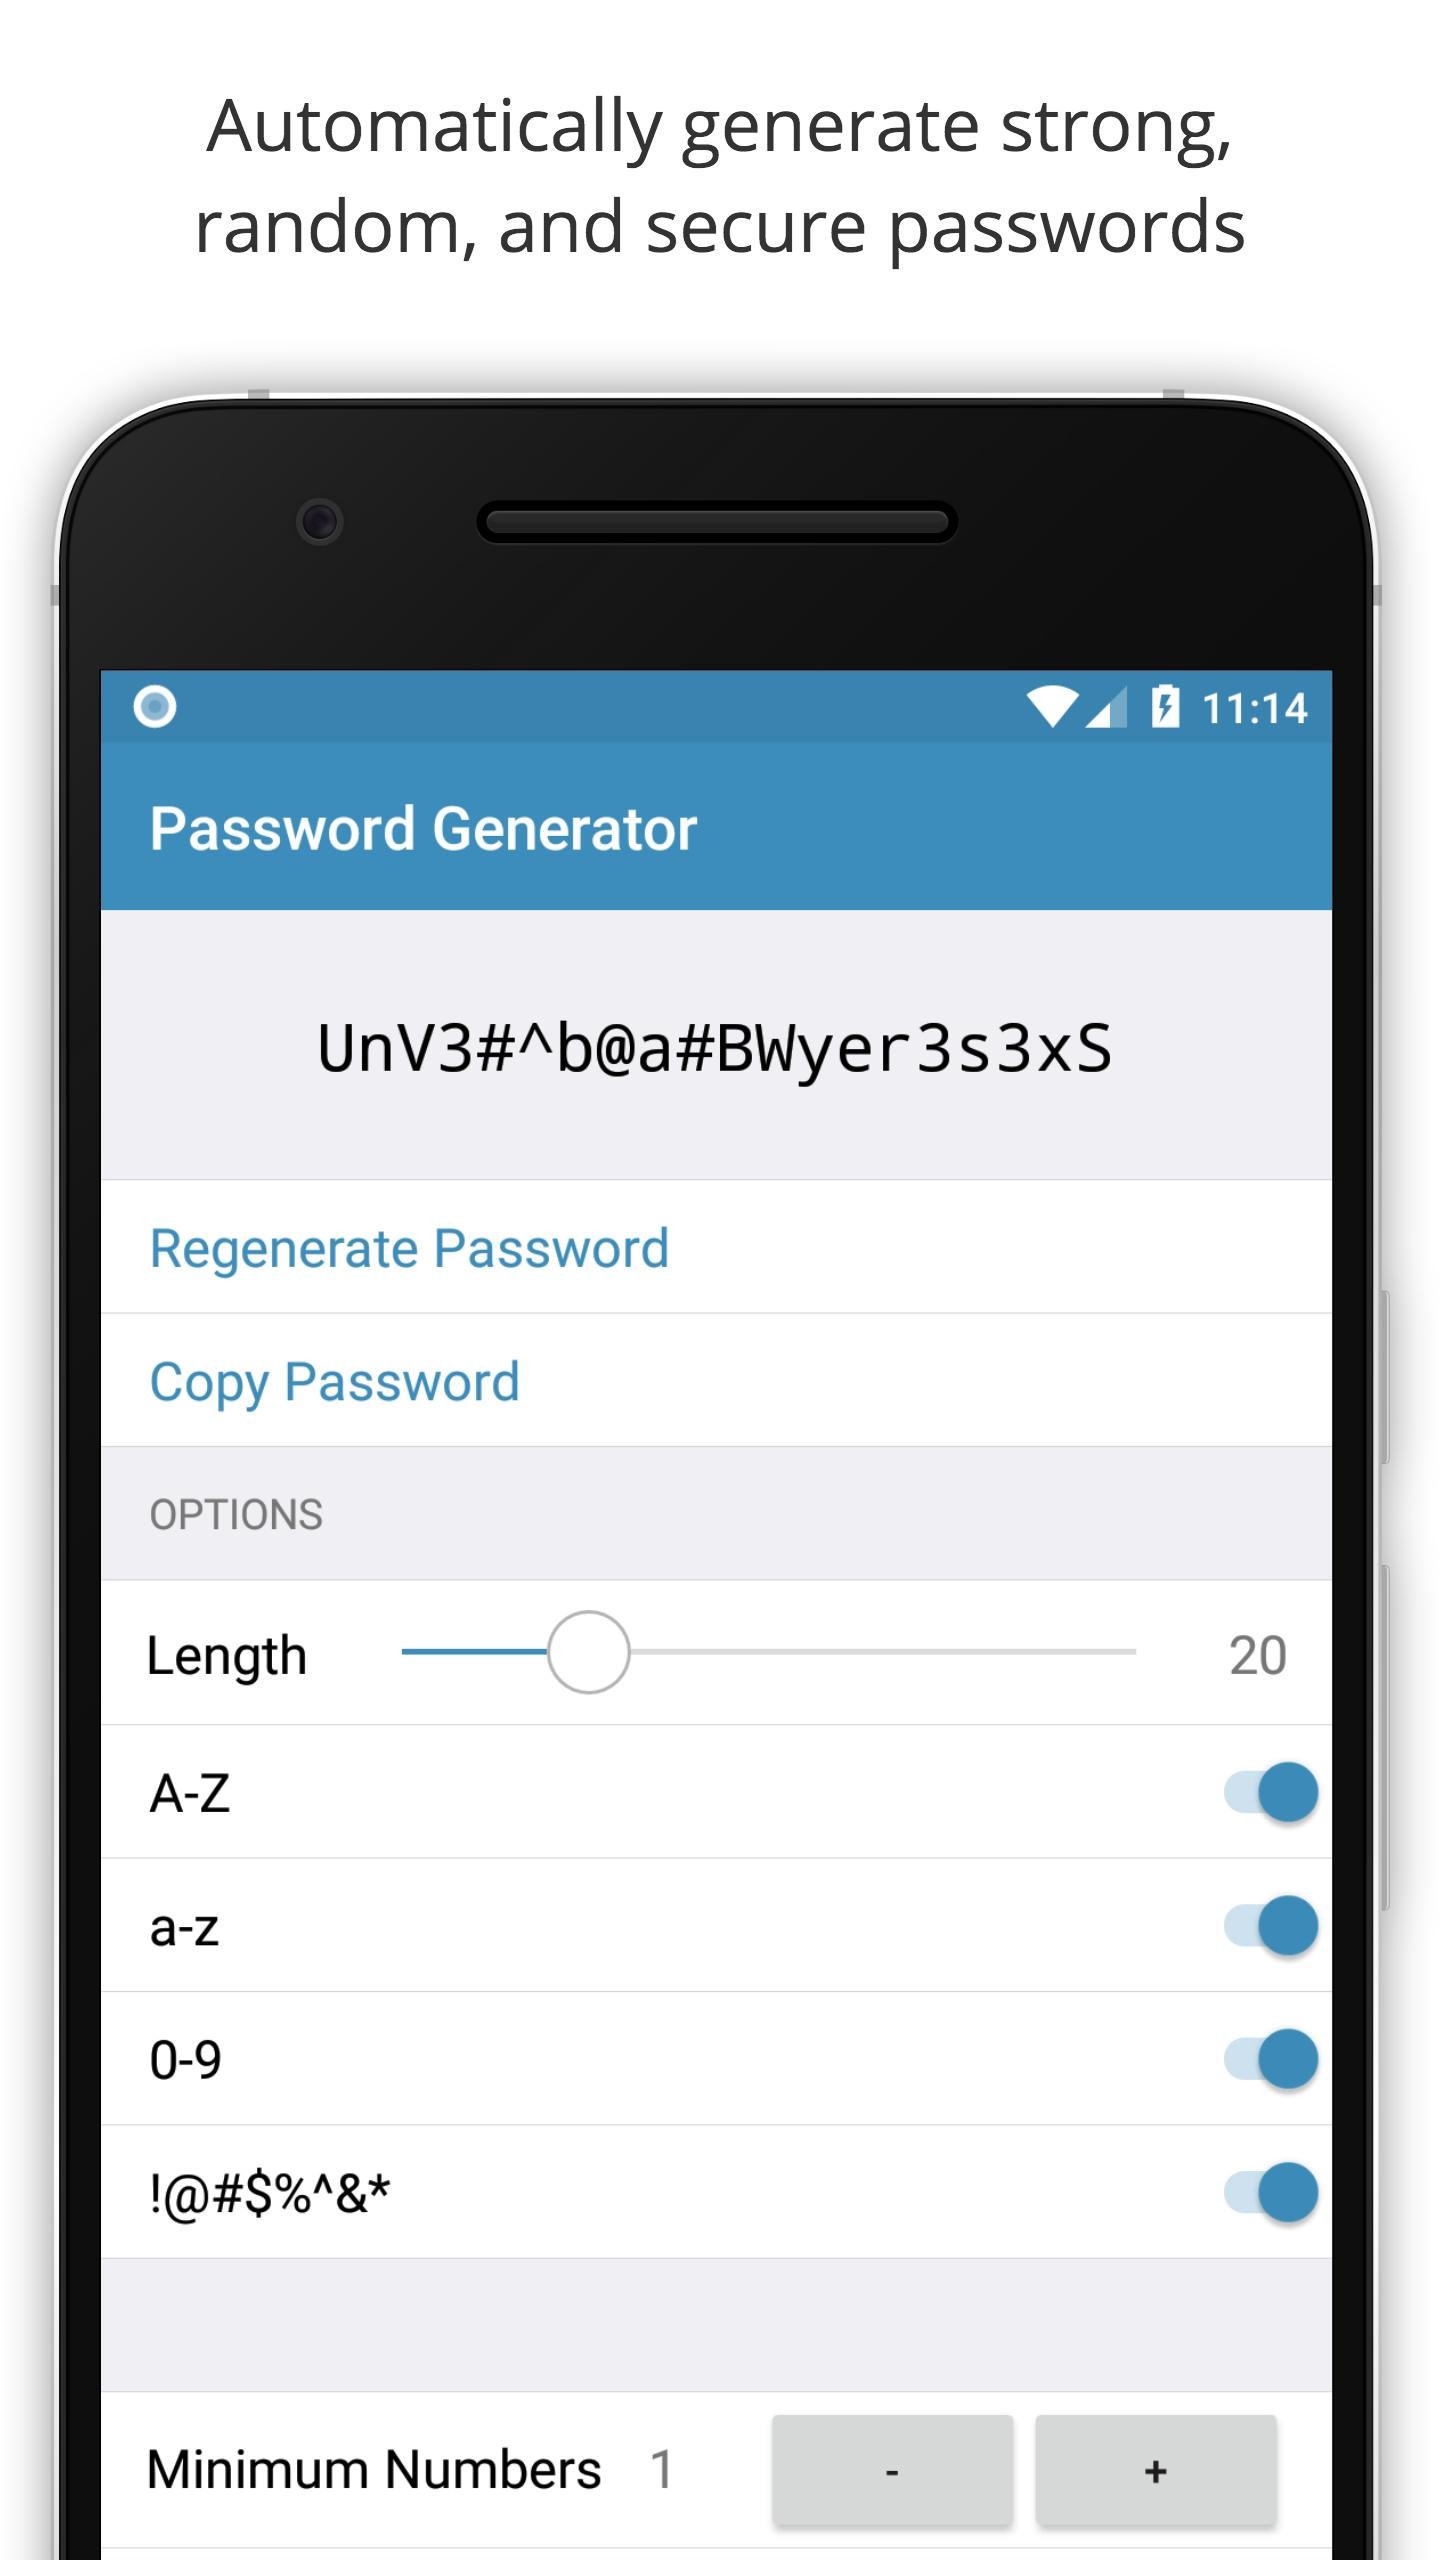 BitWarden Password Manager 2023.8.4 download the new version for android